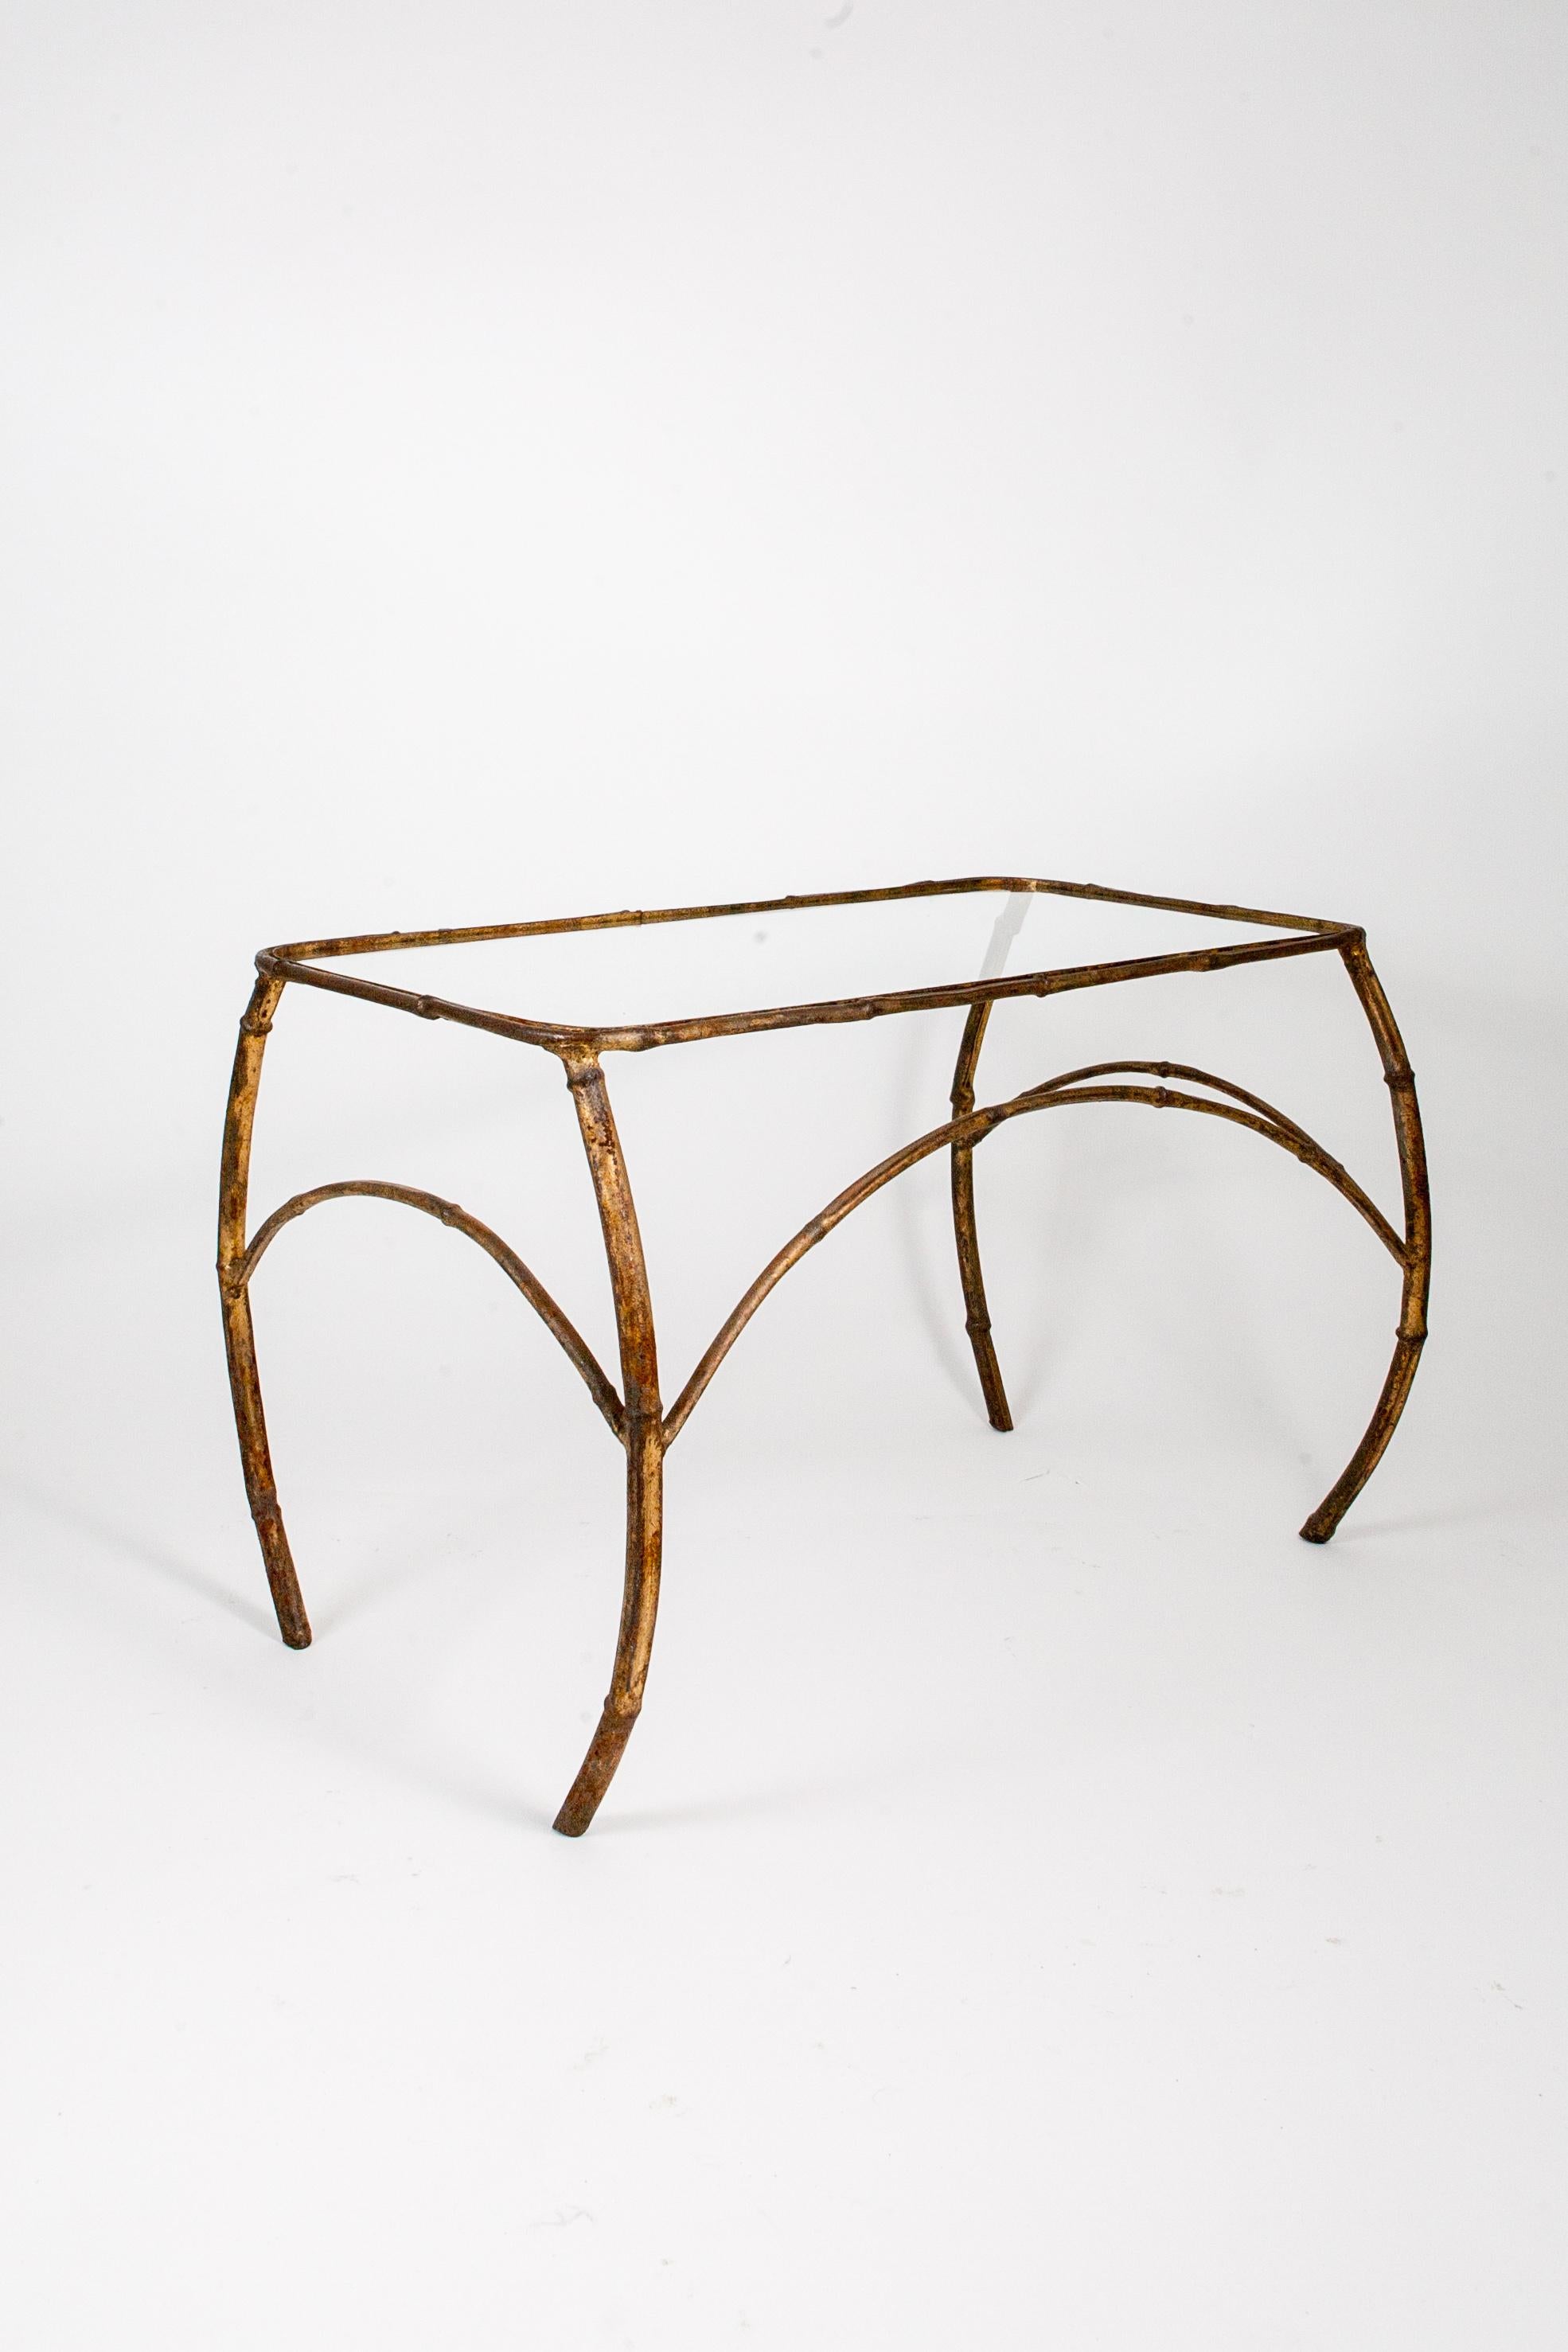 Set of French Art Deco Gilt Metal Nesting Tables For Sale 1